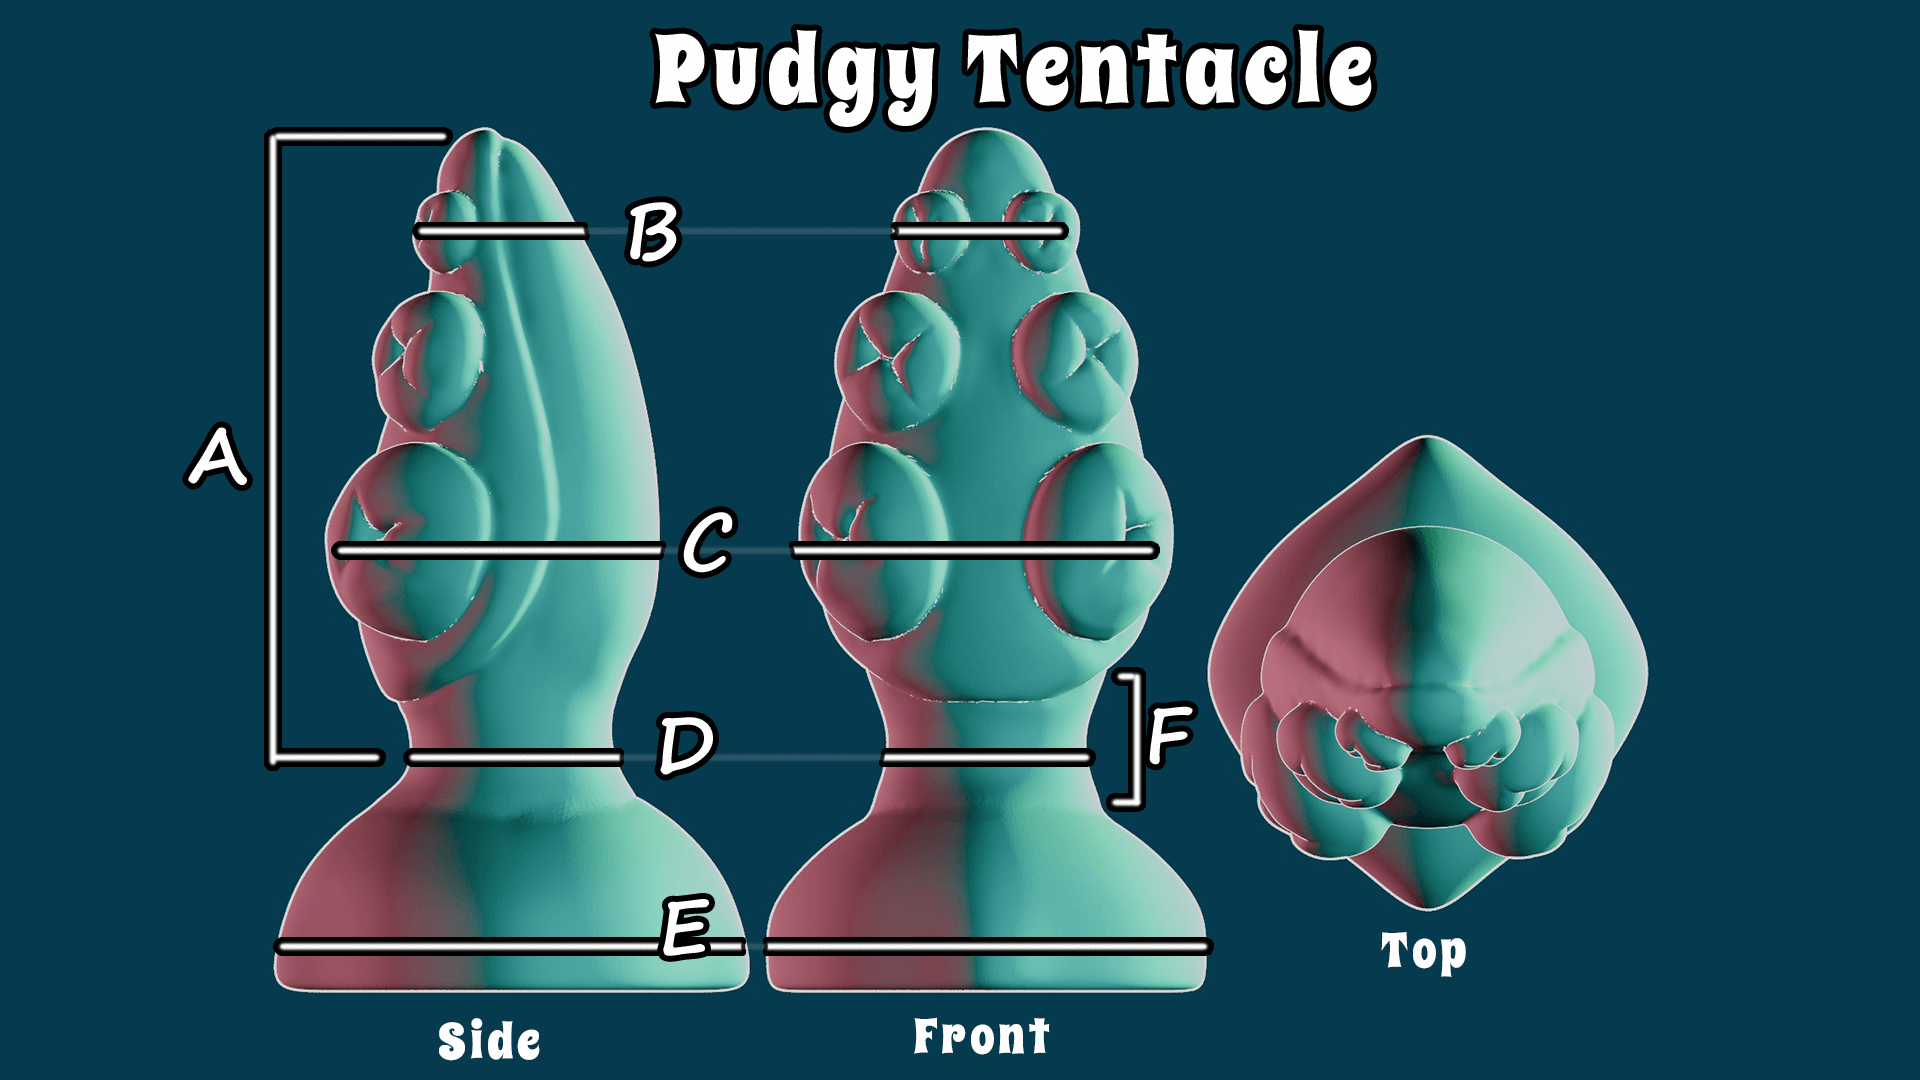 Pudgy Tentacle